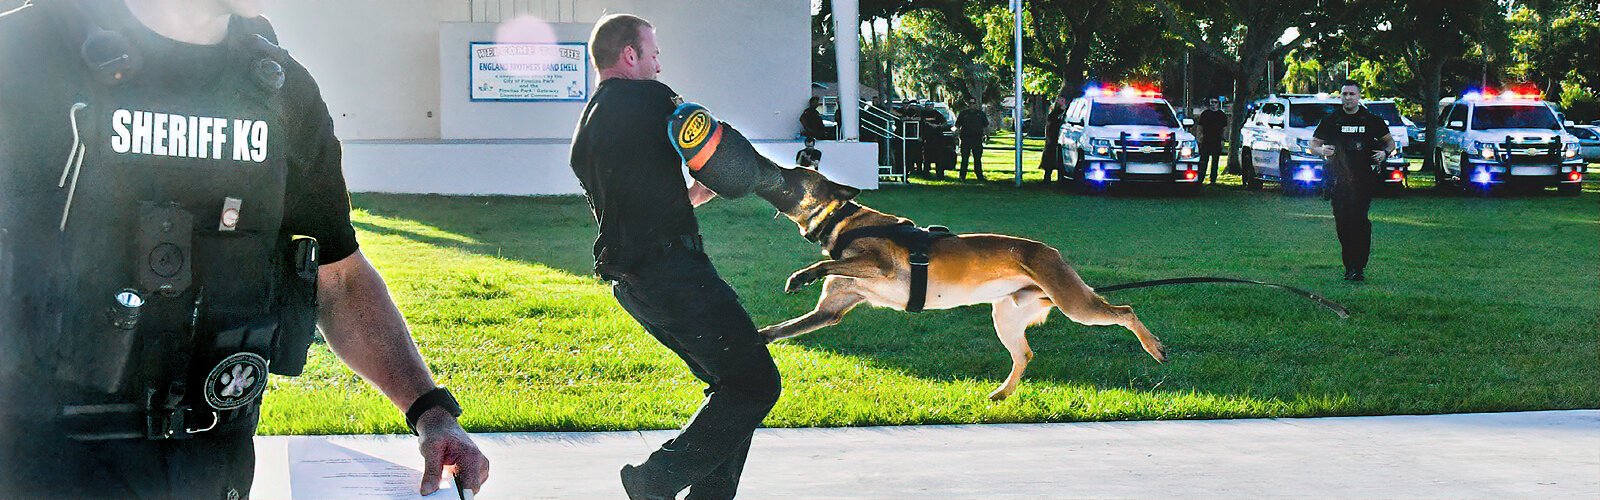 During their training, the K-9s learn obedience commands, bite work and other skills they demonstrate for the public during the graduation ceremony.